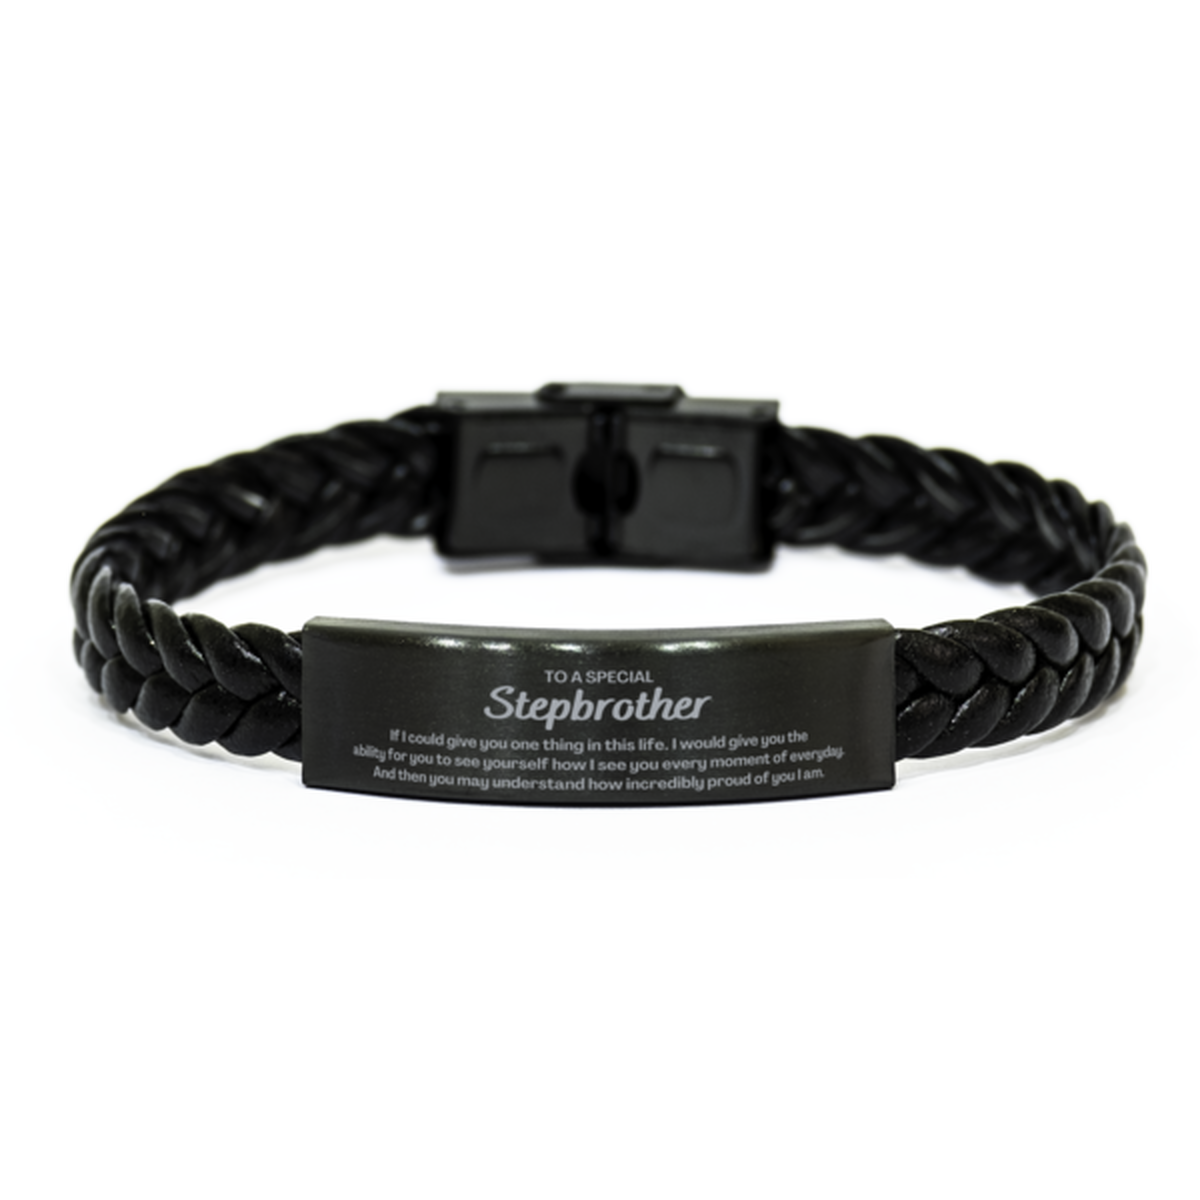 To My Stepbrother Braided Leather Bracelet, Gifts For Stepbrother Engraved, Inspirational Gifts for Christmas Birthday, Epic Gifts for Stepbrother To A Special Stepbrother how incredibly proud of you I am